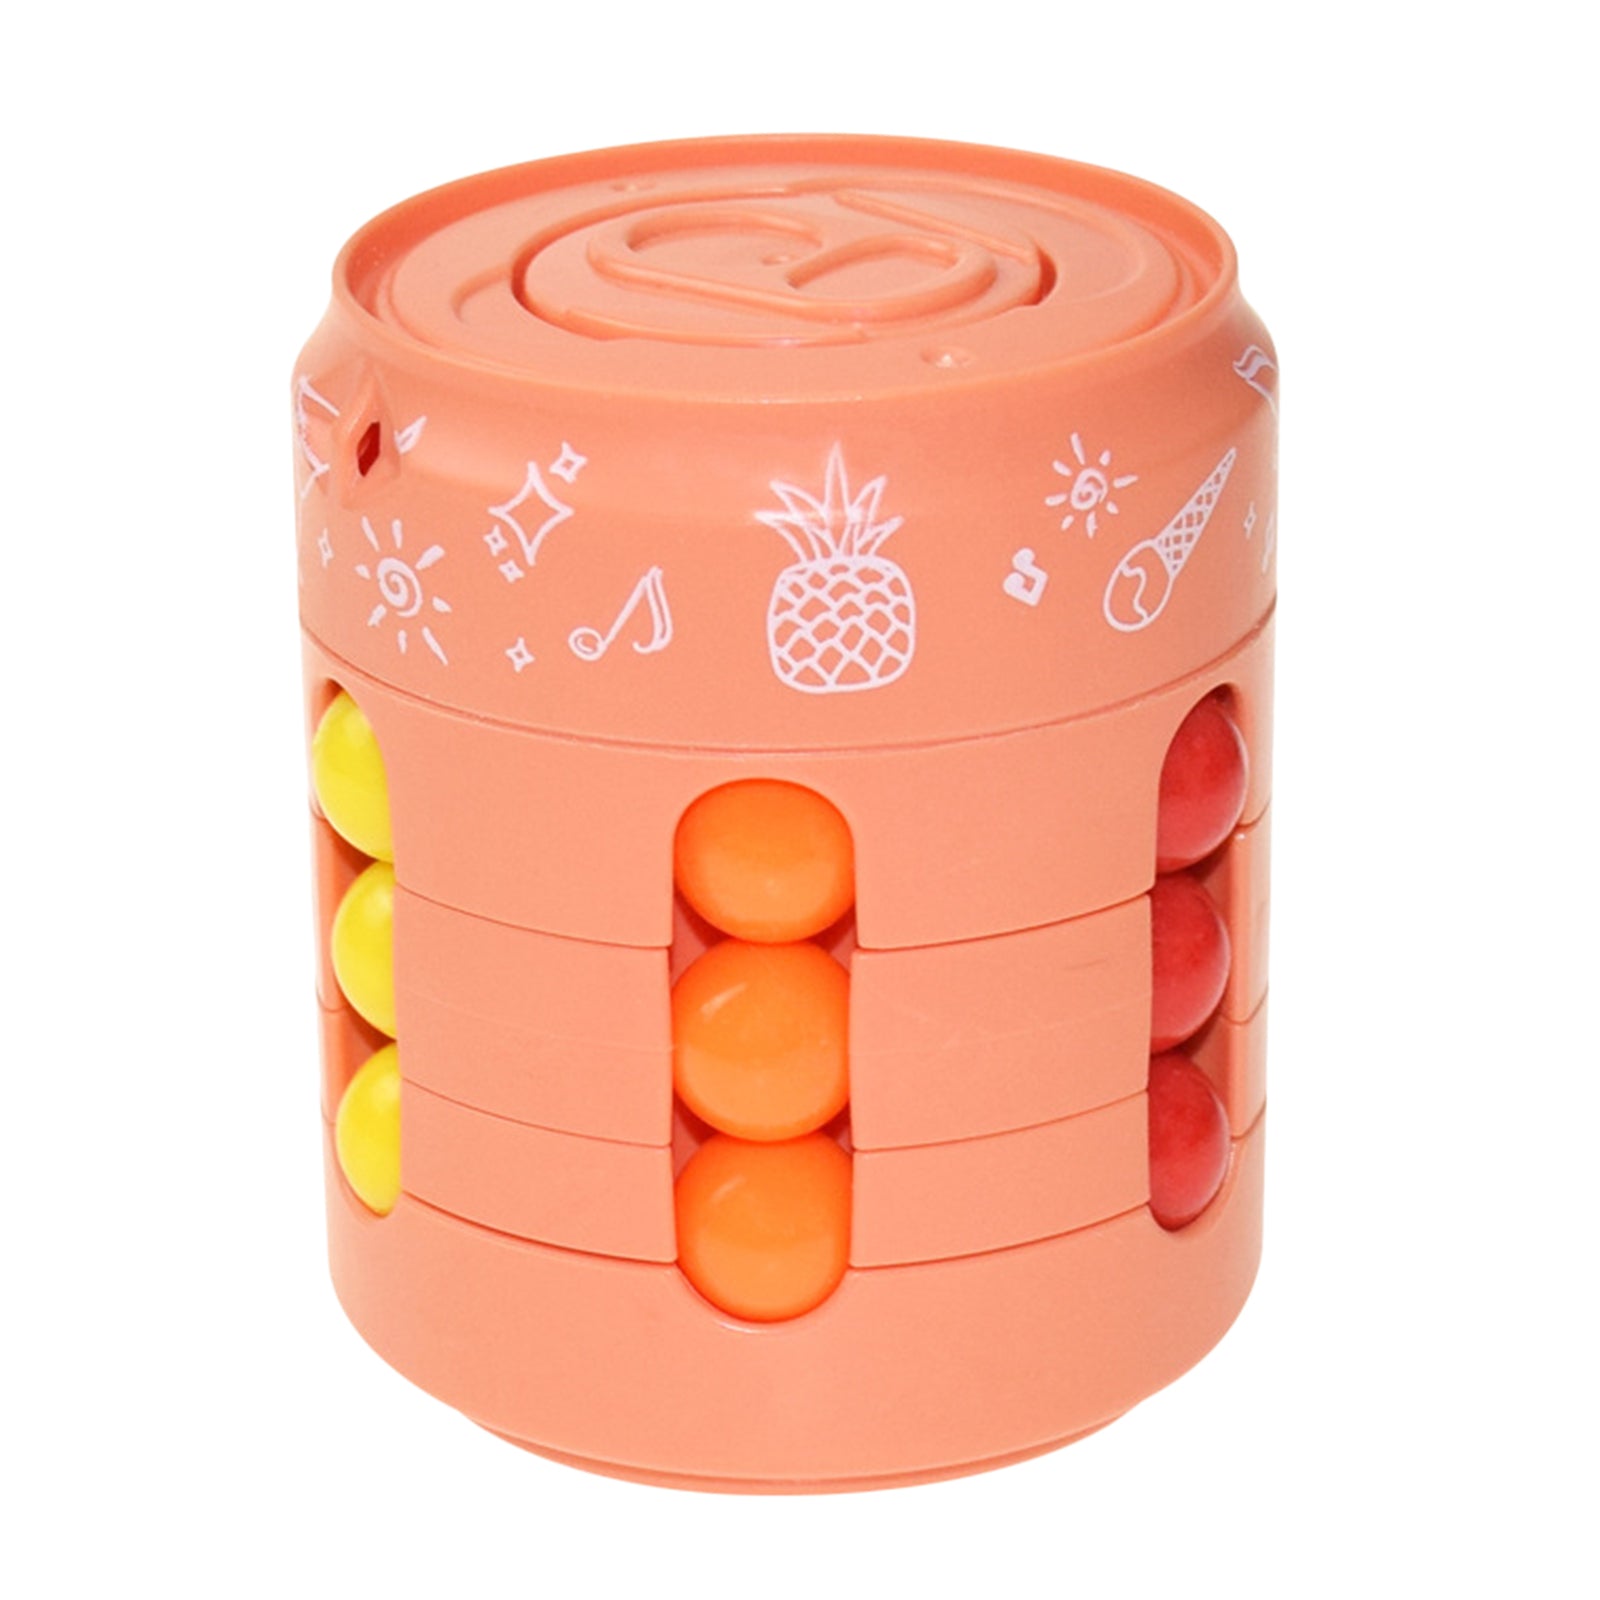 Kids Educational Toys Cube Twist Puzzle Game Hand Spinner Finger Gyro Orange